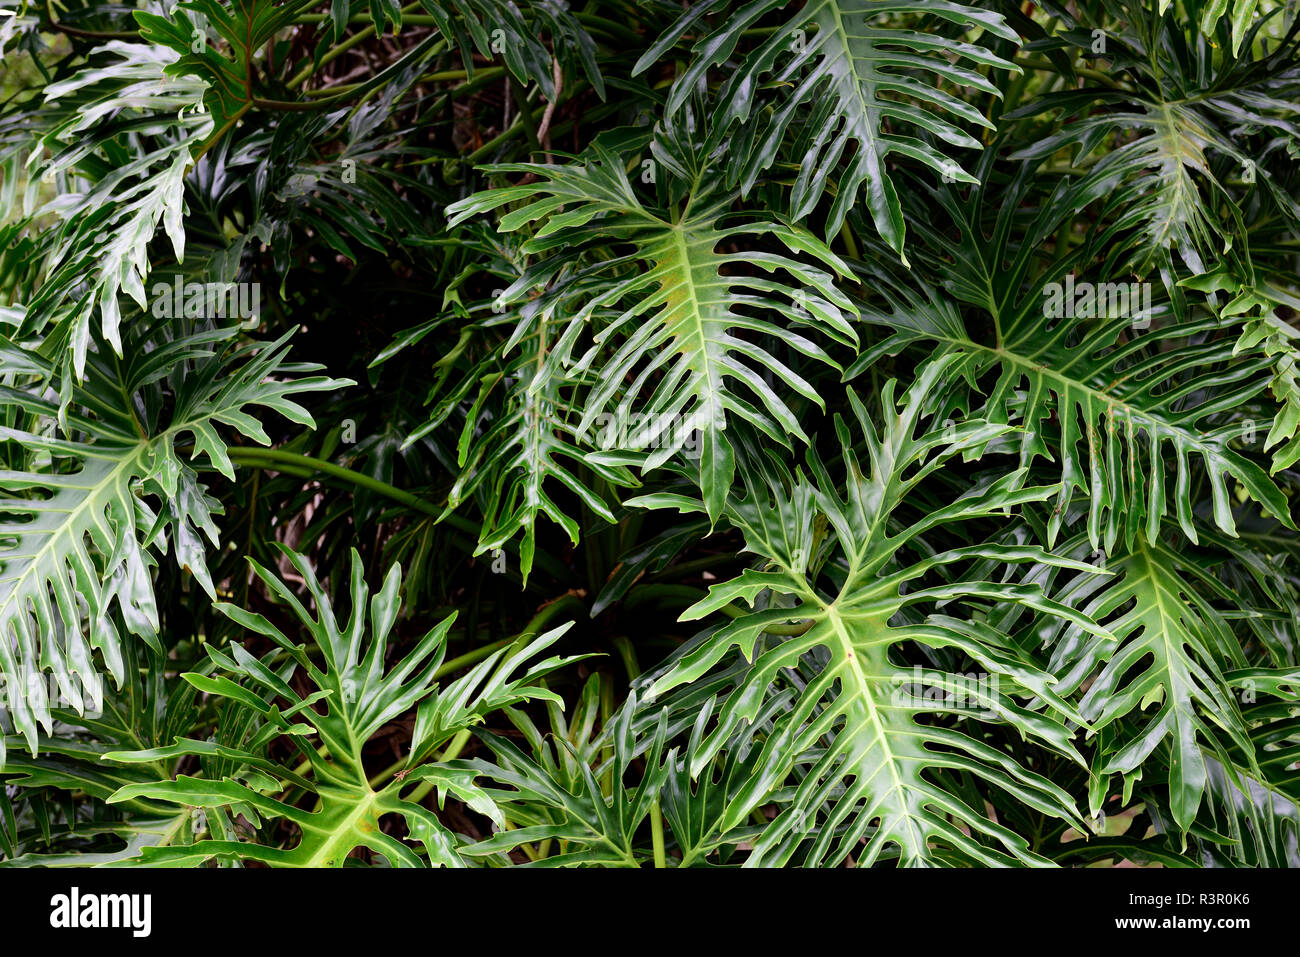 Lush deep green leaves and exotic shapes in a tropical rainforest in Costa Rica, Central America Stock Photo